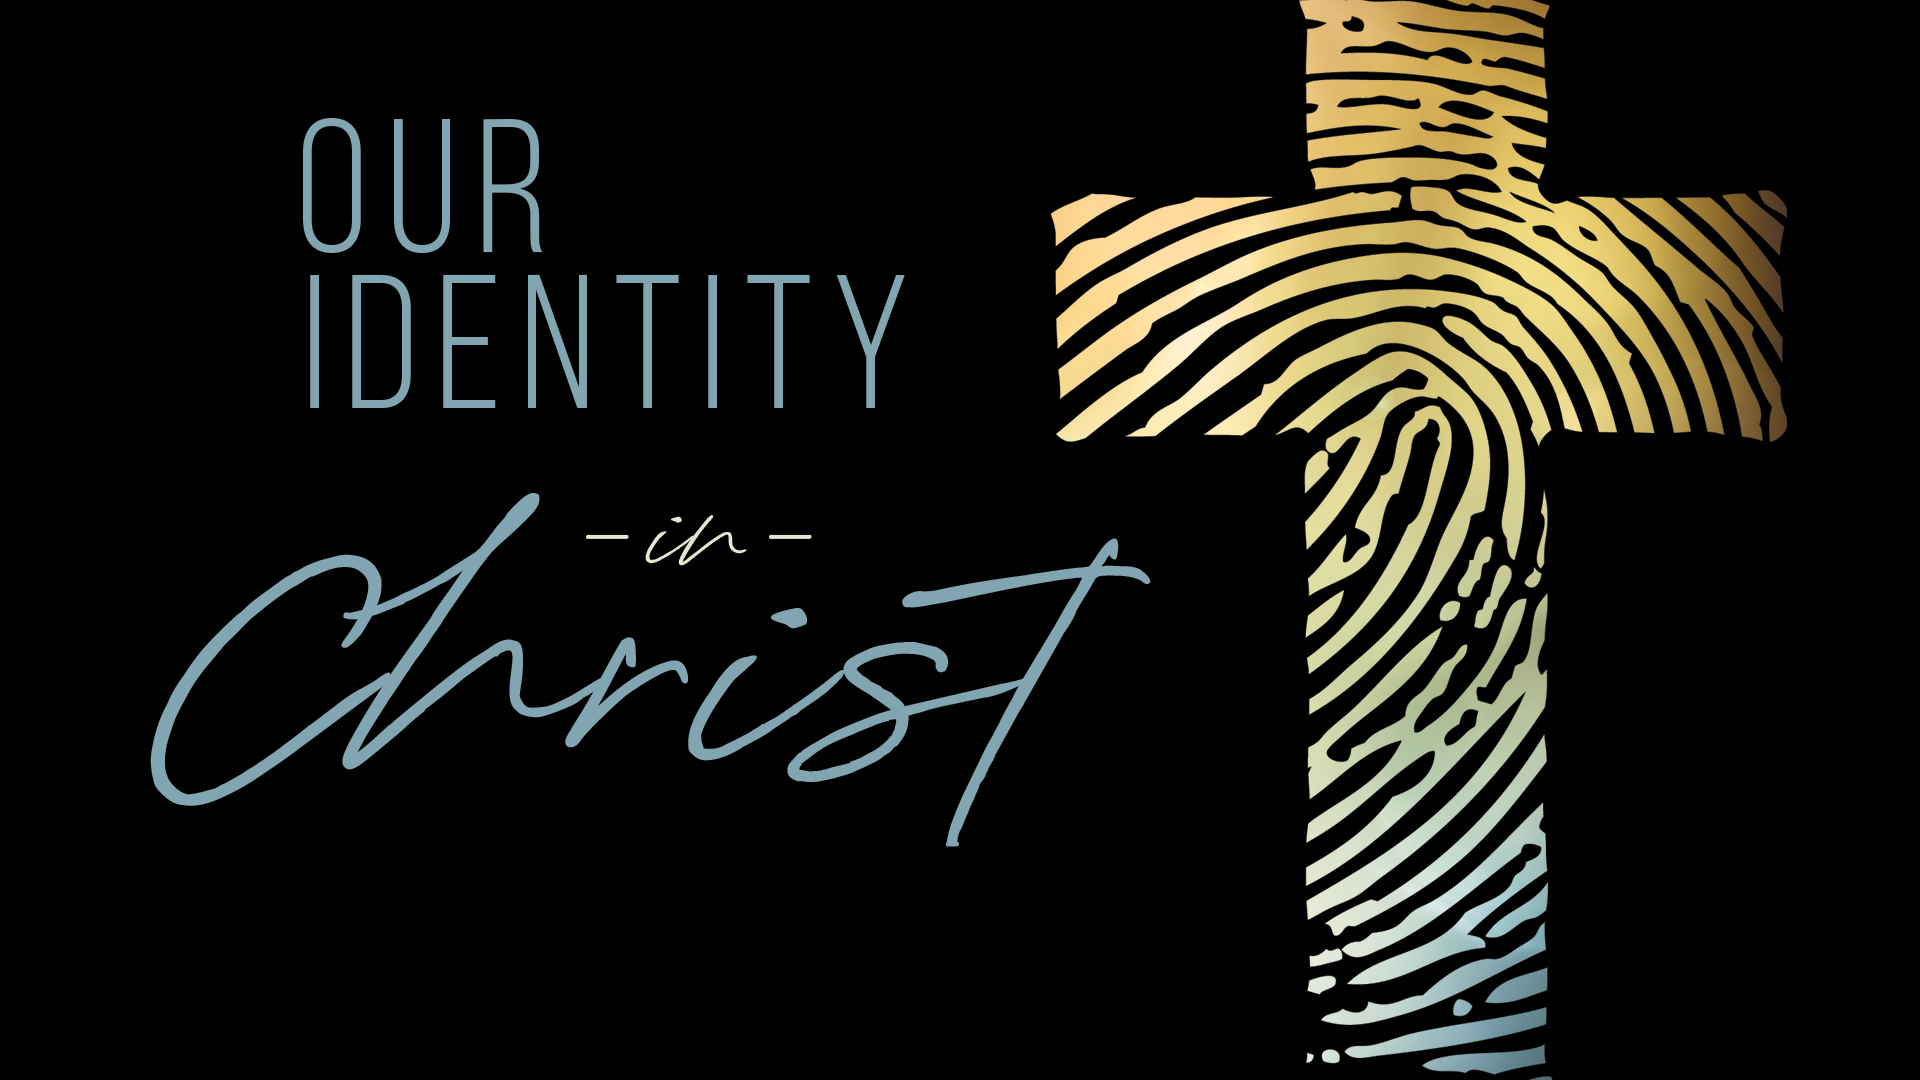 Our Identity in Christ: We Were Made to Worship